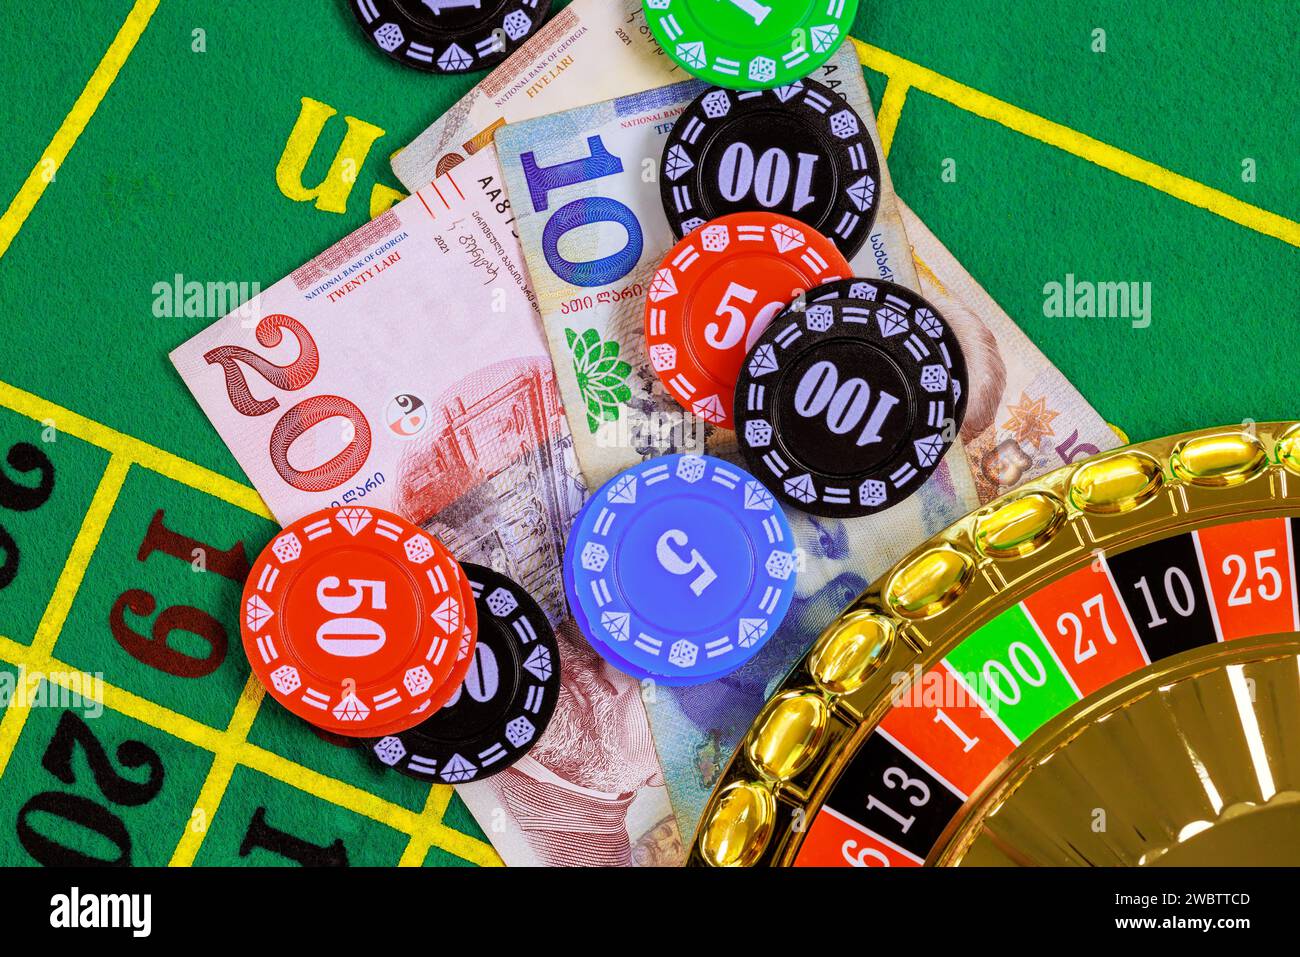 On green gaming table there are roulette, Georgian banknotes in lari poker chips. Stock Photo